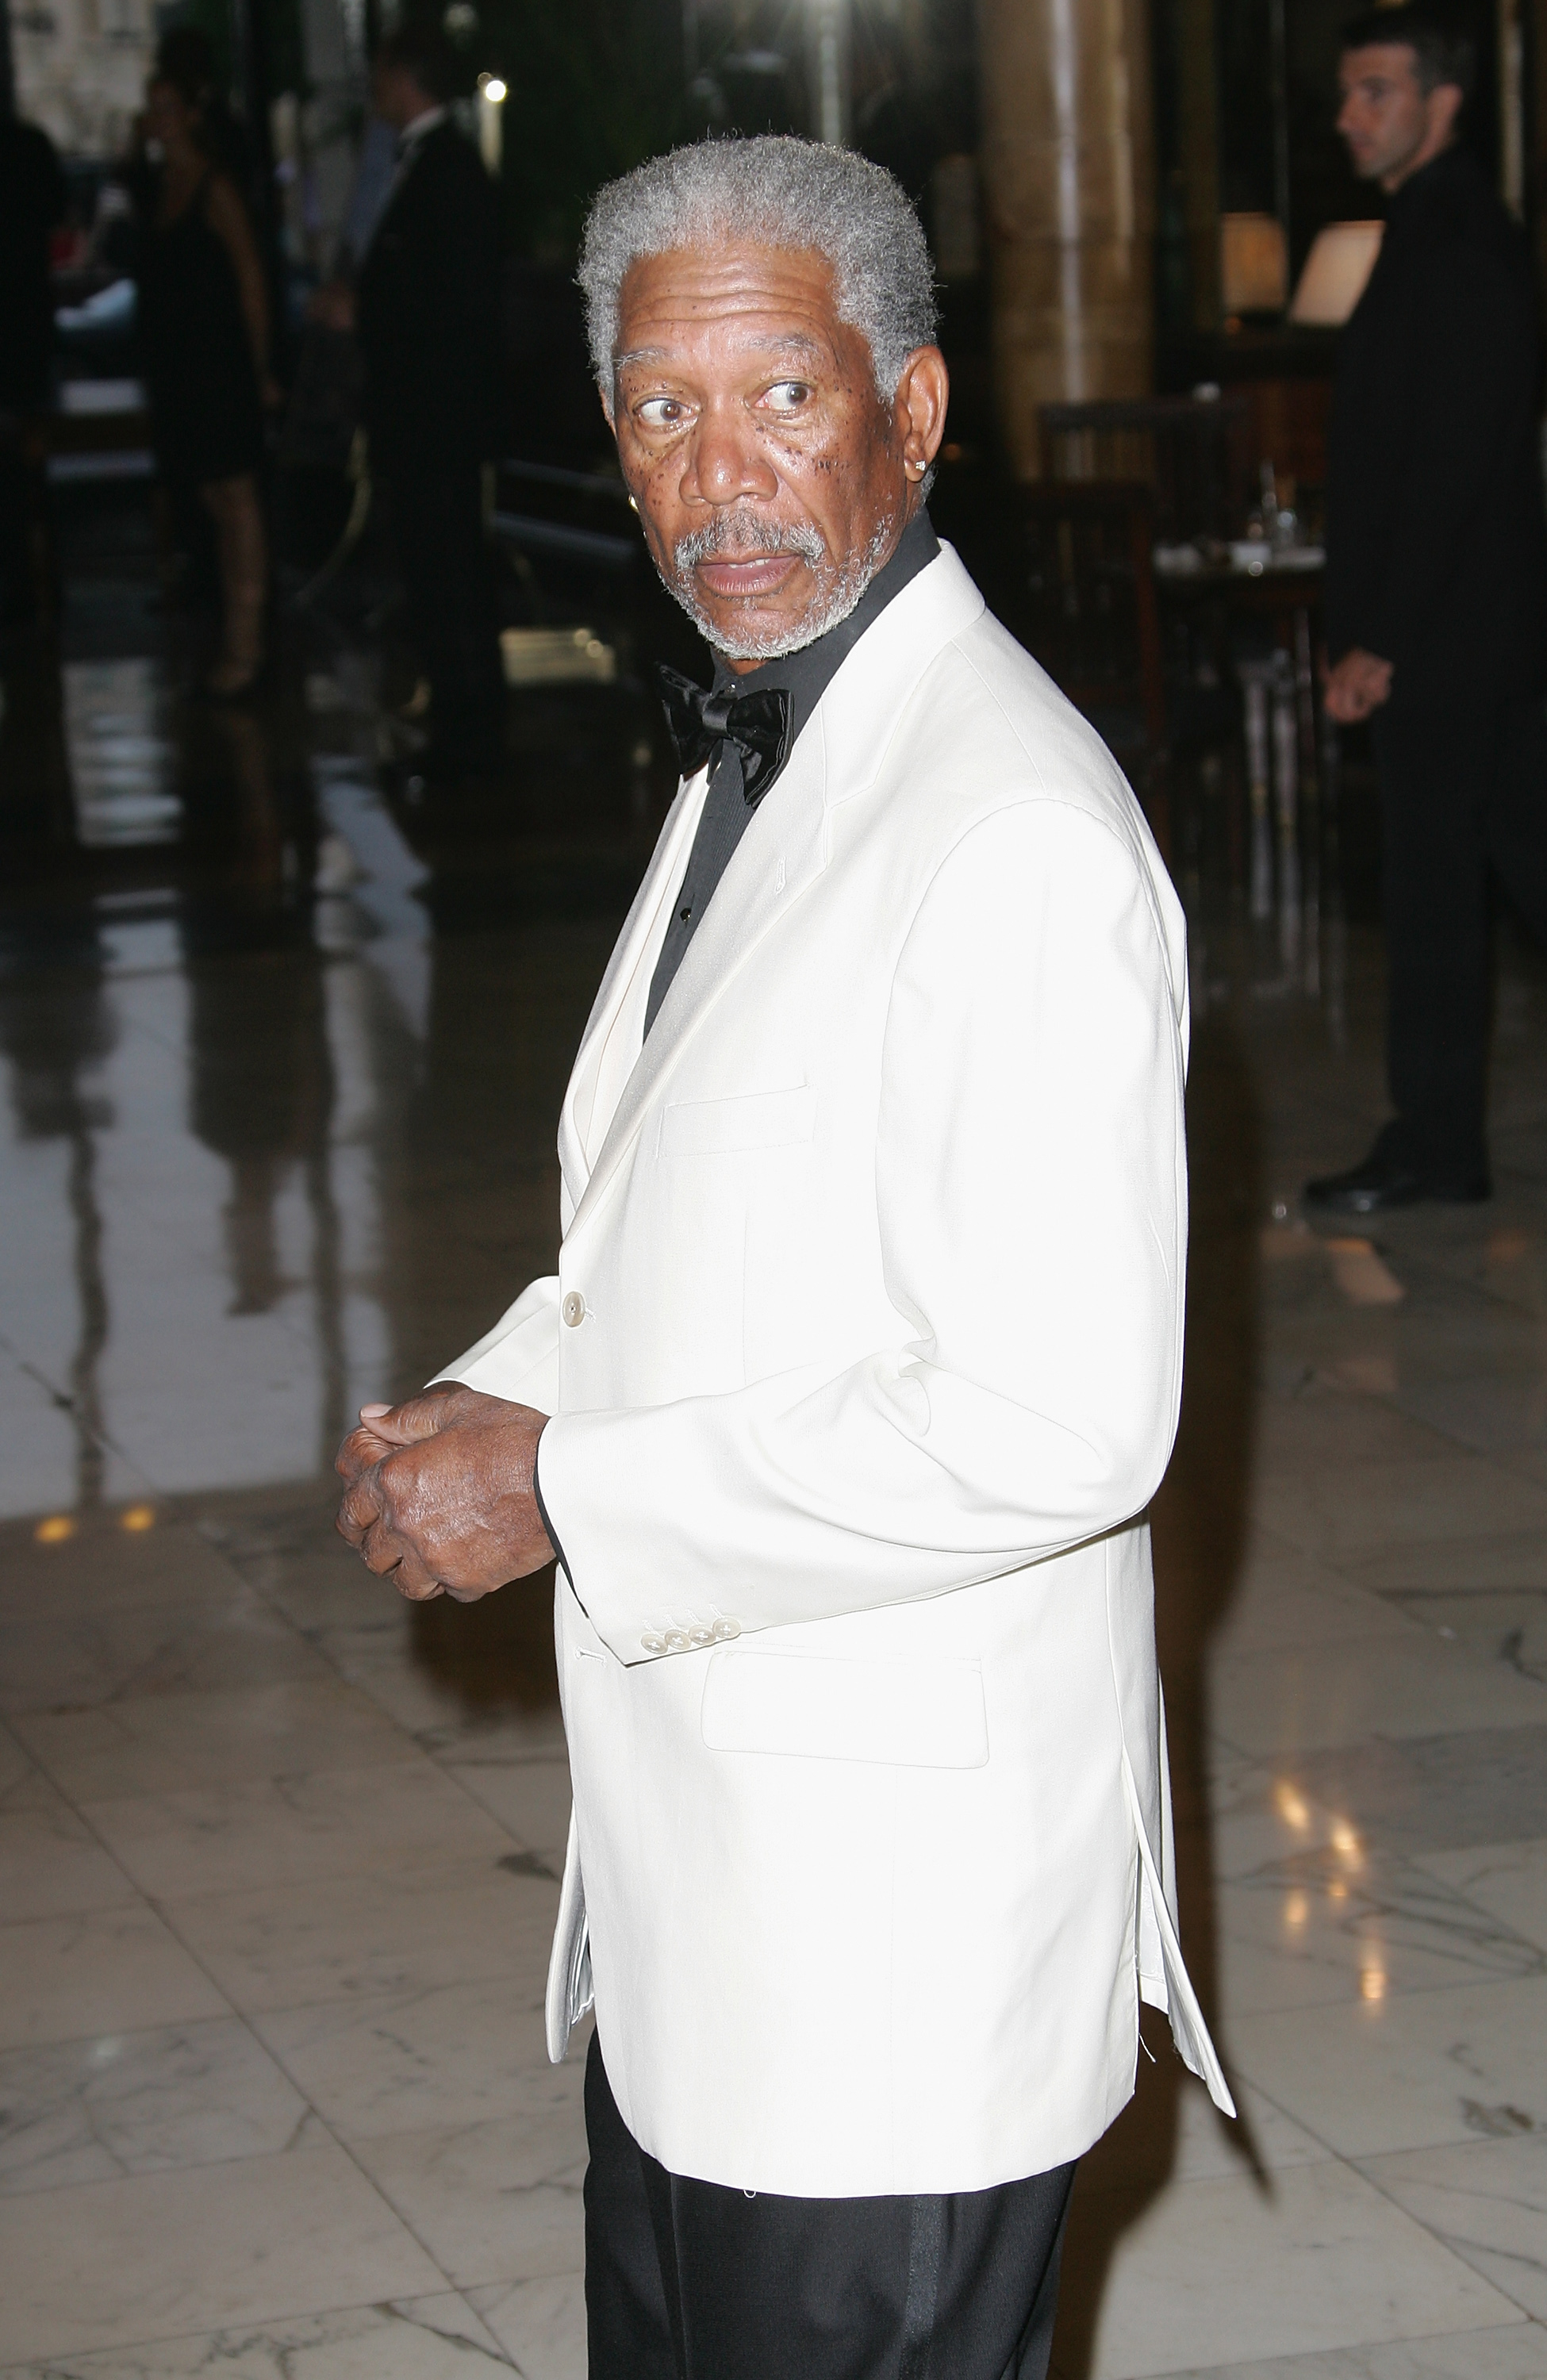 Morgan Freeman in a white suit jacket and black bow tie at an event